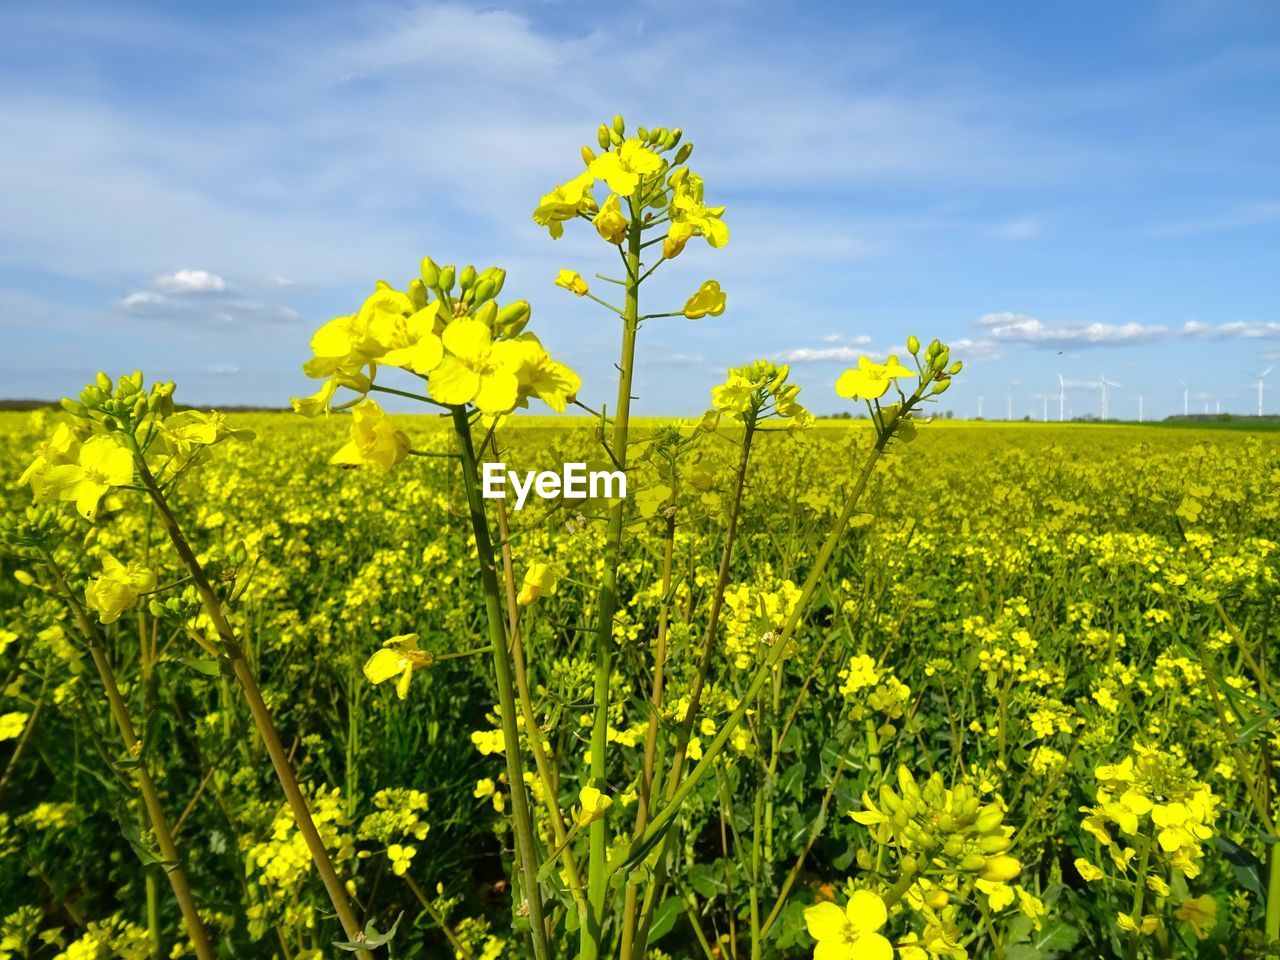 rapeseed, plant, flower, vegetable, produce, canola, beauty in nature, yellow, food, field, sky, growth, landscape, land, flowering plant, brassica rapa, mustard, agriculture, oilseed rape, rural scene, nature, freshness, environment, meadow, cloud, crop, prairie, scenics - nature, springtime, farm, tranquility, tranquil scene, no people, blossom, day, fragility, vibrant color, outdoors, grassland, wildflower, idyllic, green, cultivated, abundance, rural area, sunlight